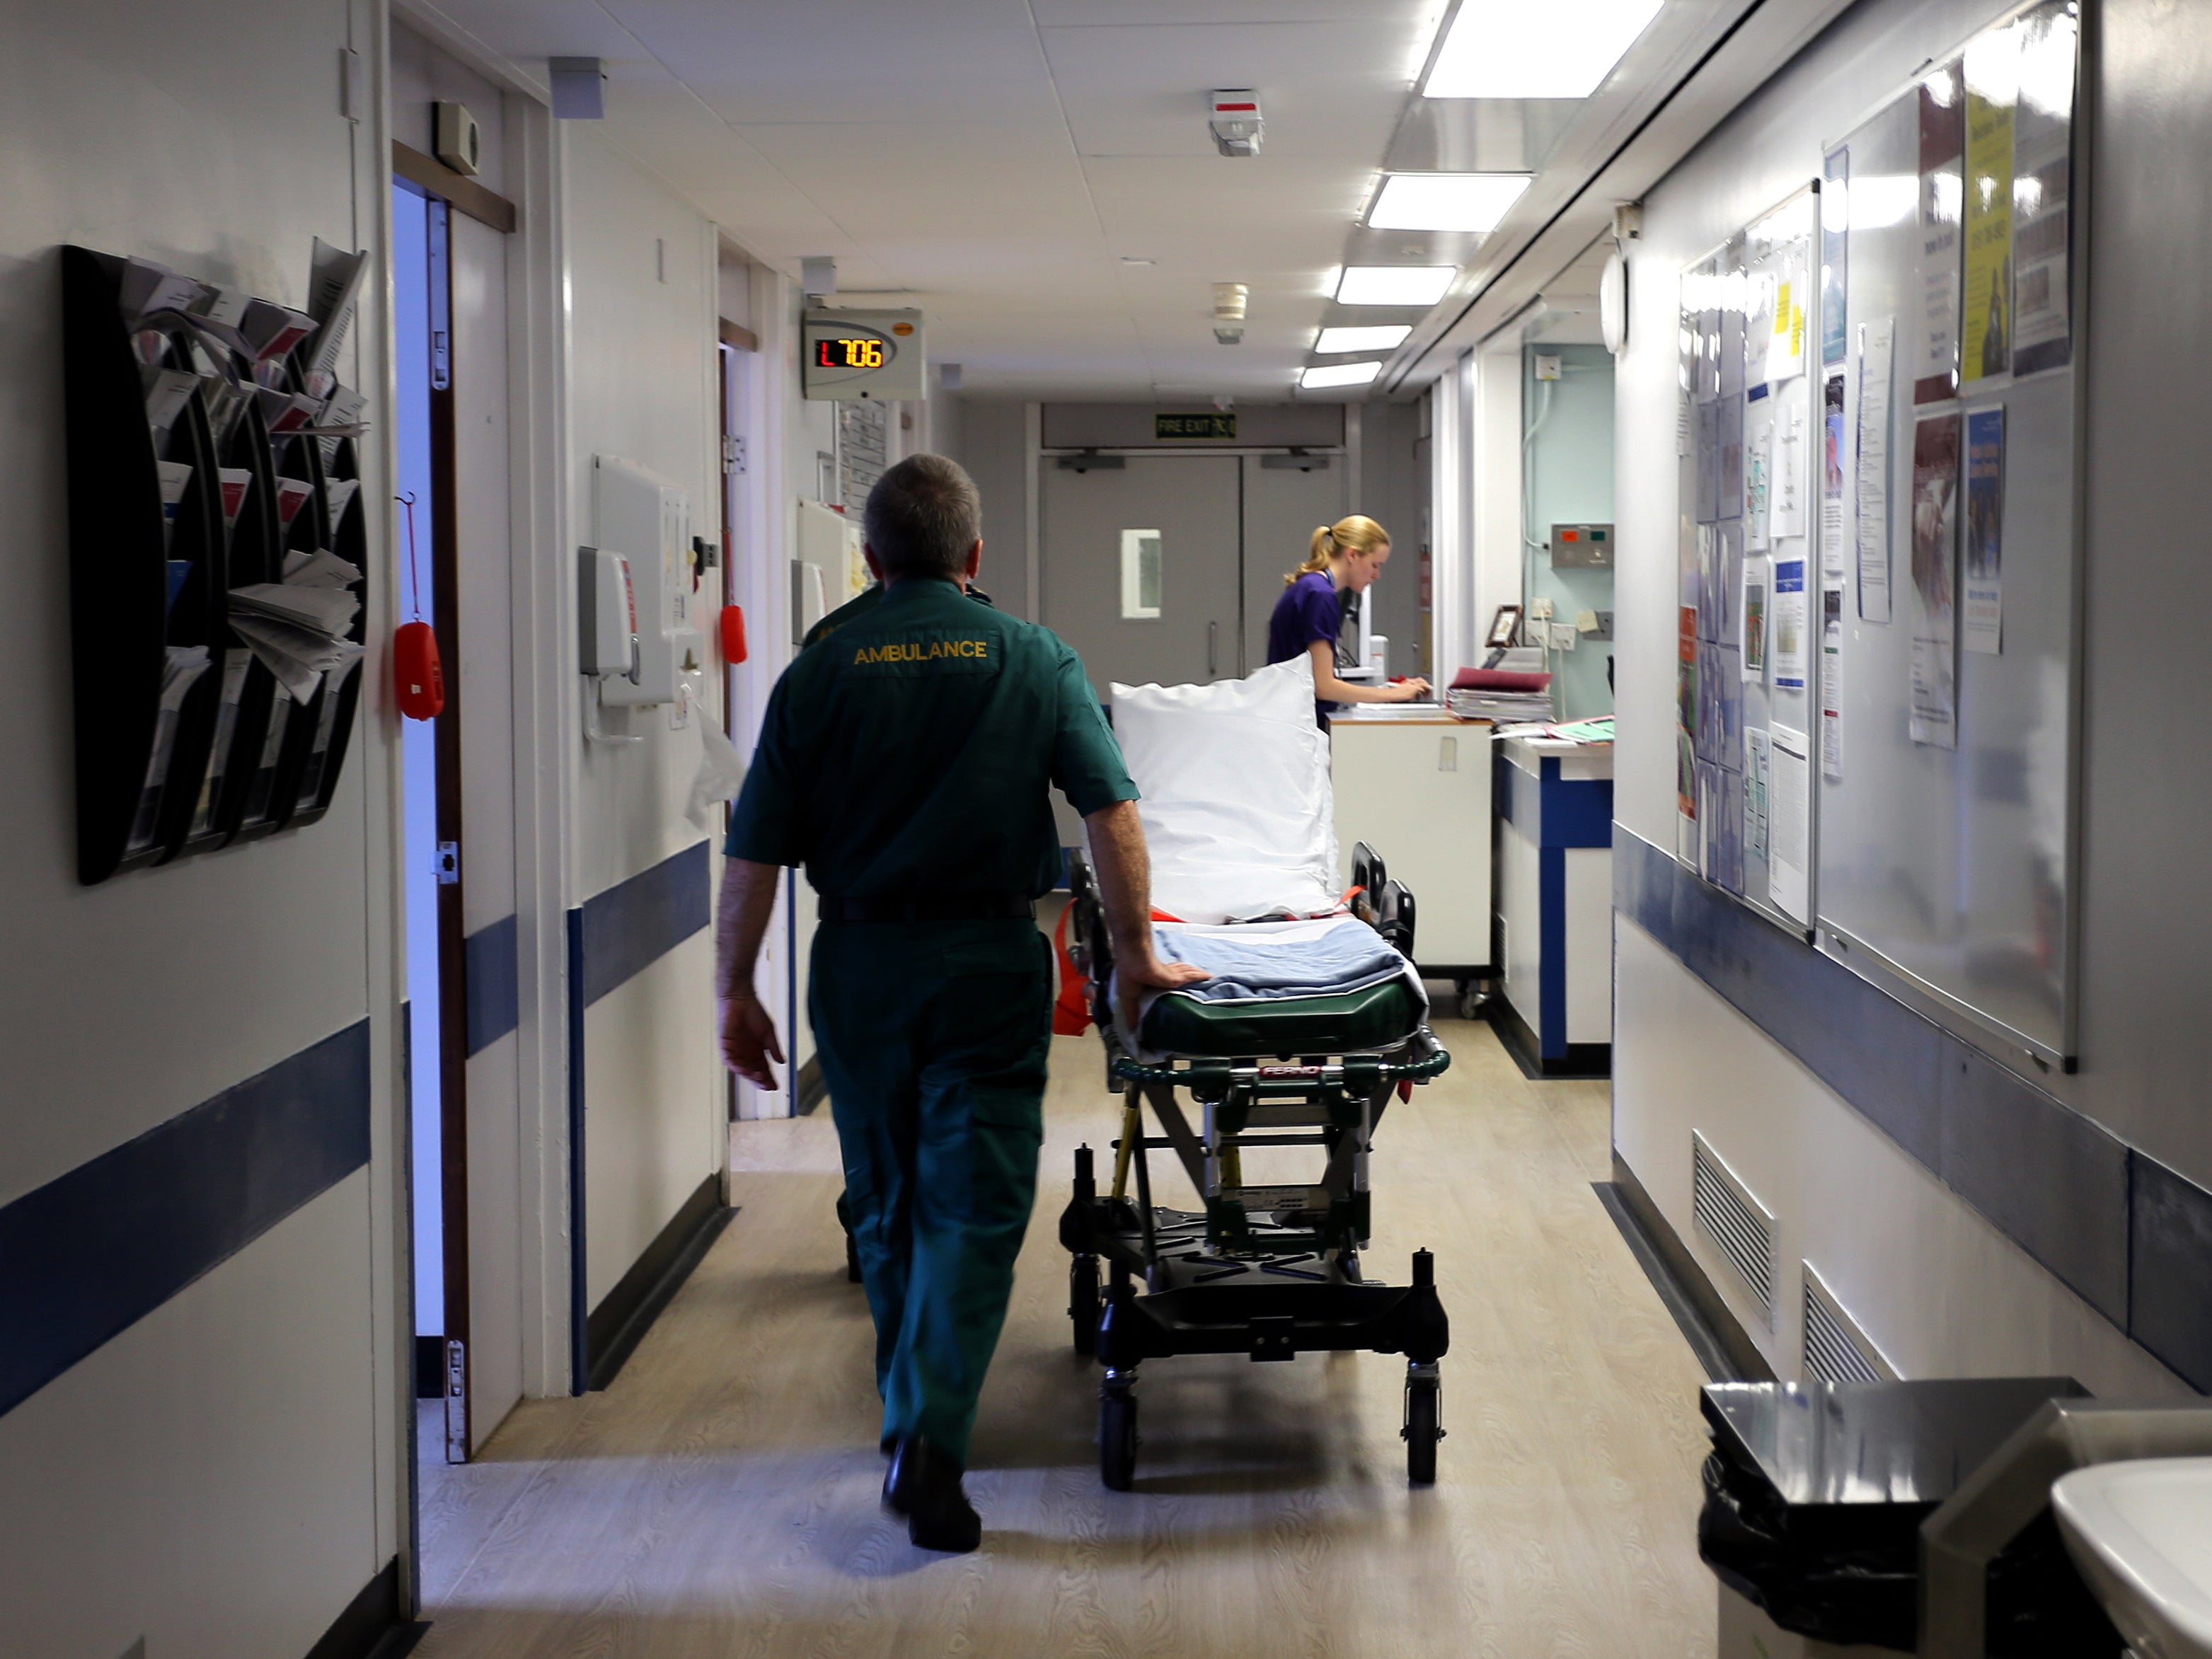 A ward at Royal Liverpool University Hospital where inspectors found wards were dangerously understaffed